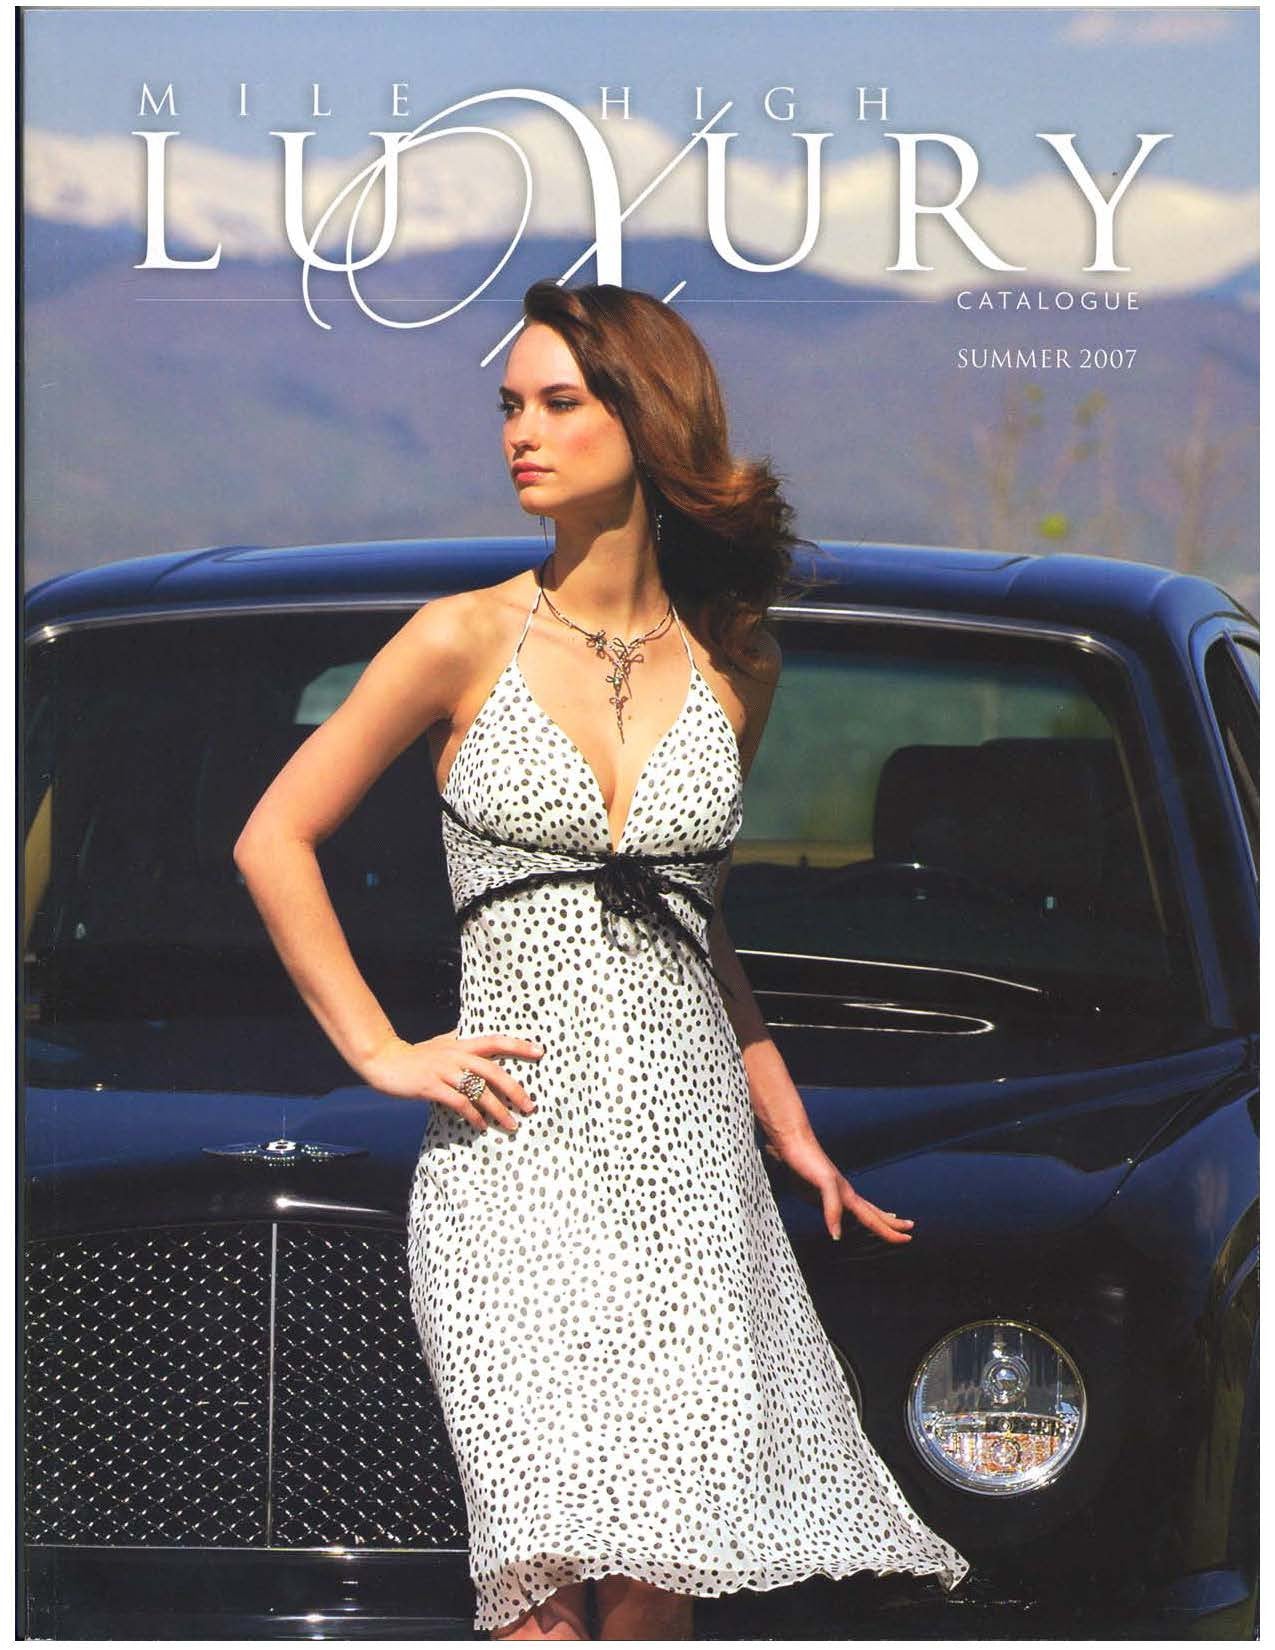 Mile High Luxury Catalogue Featuring Oster Jewelers 